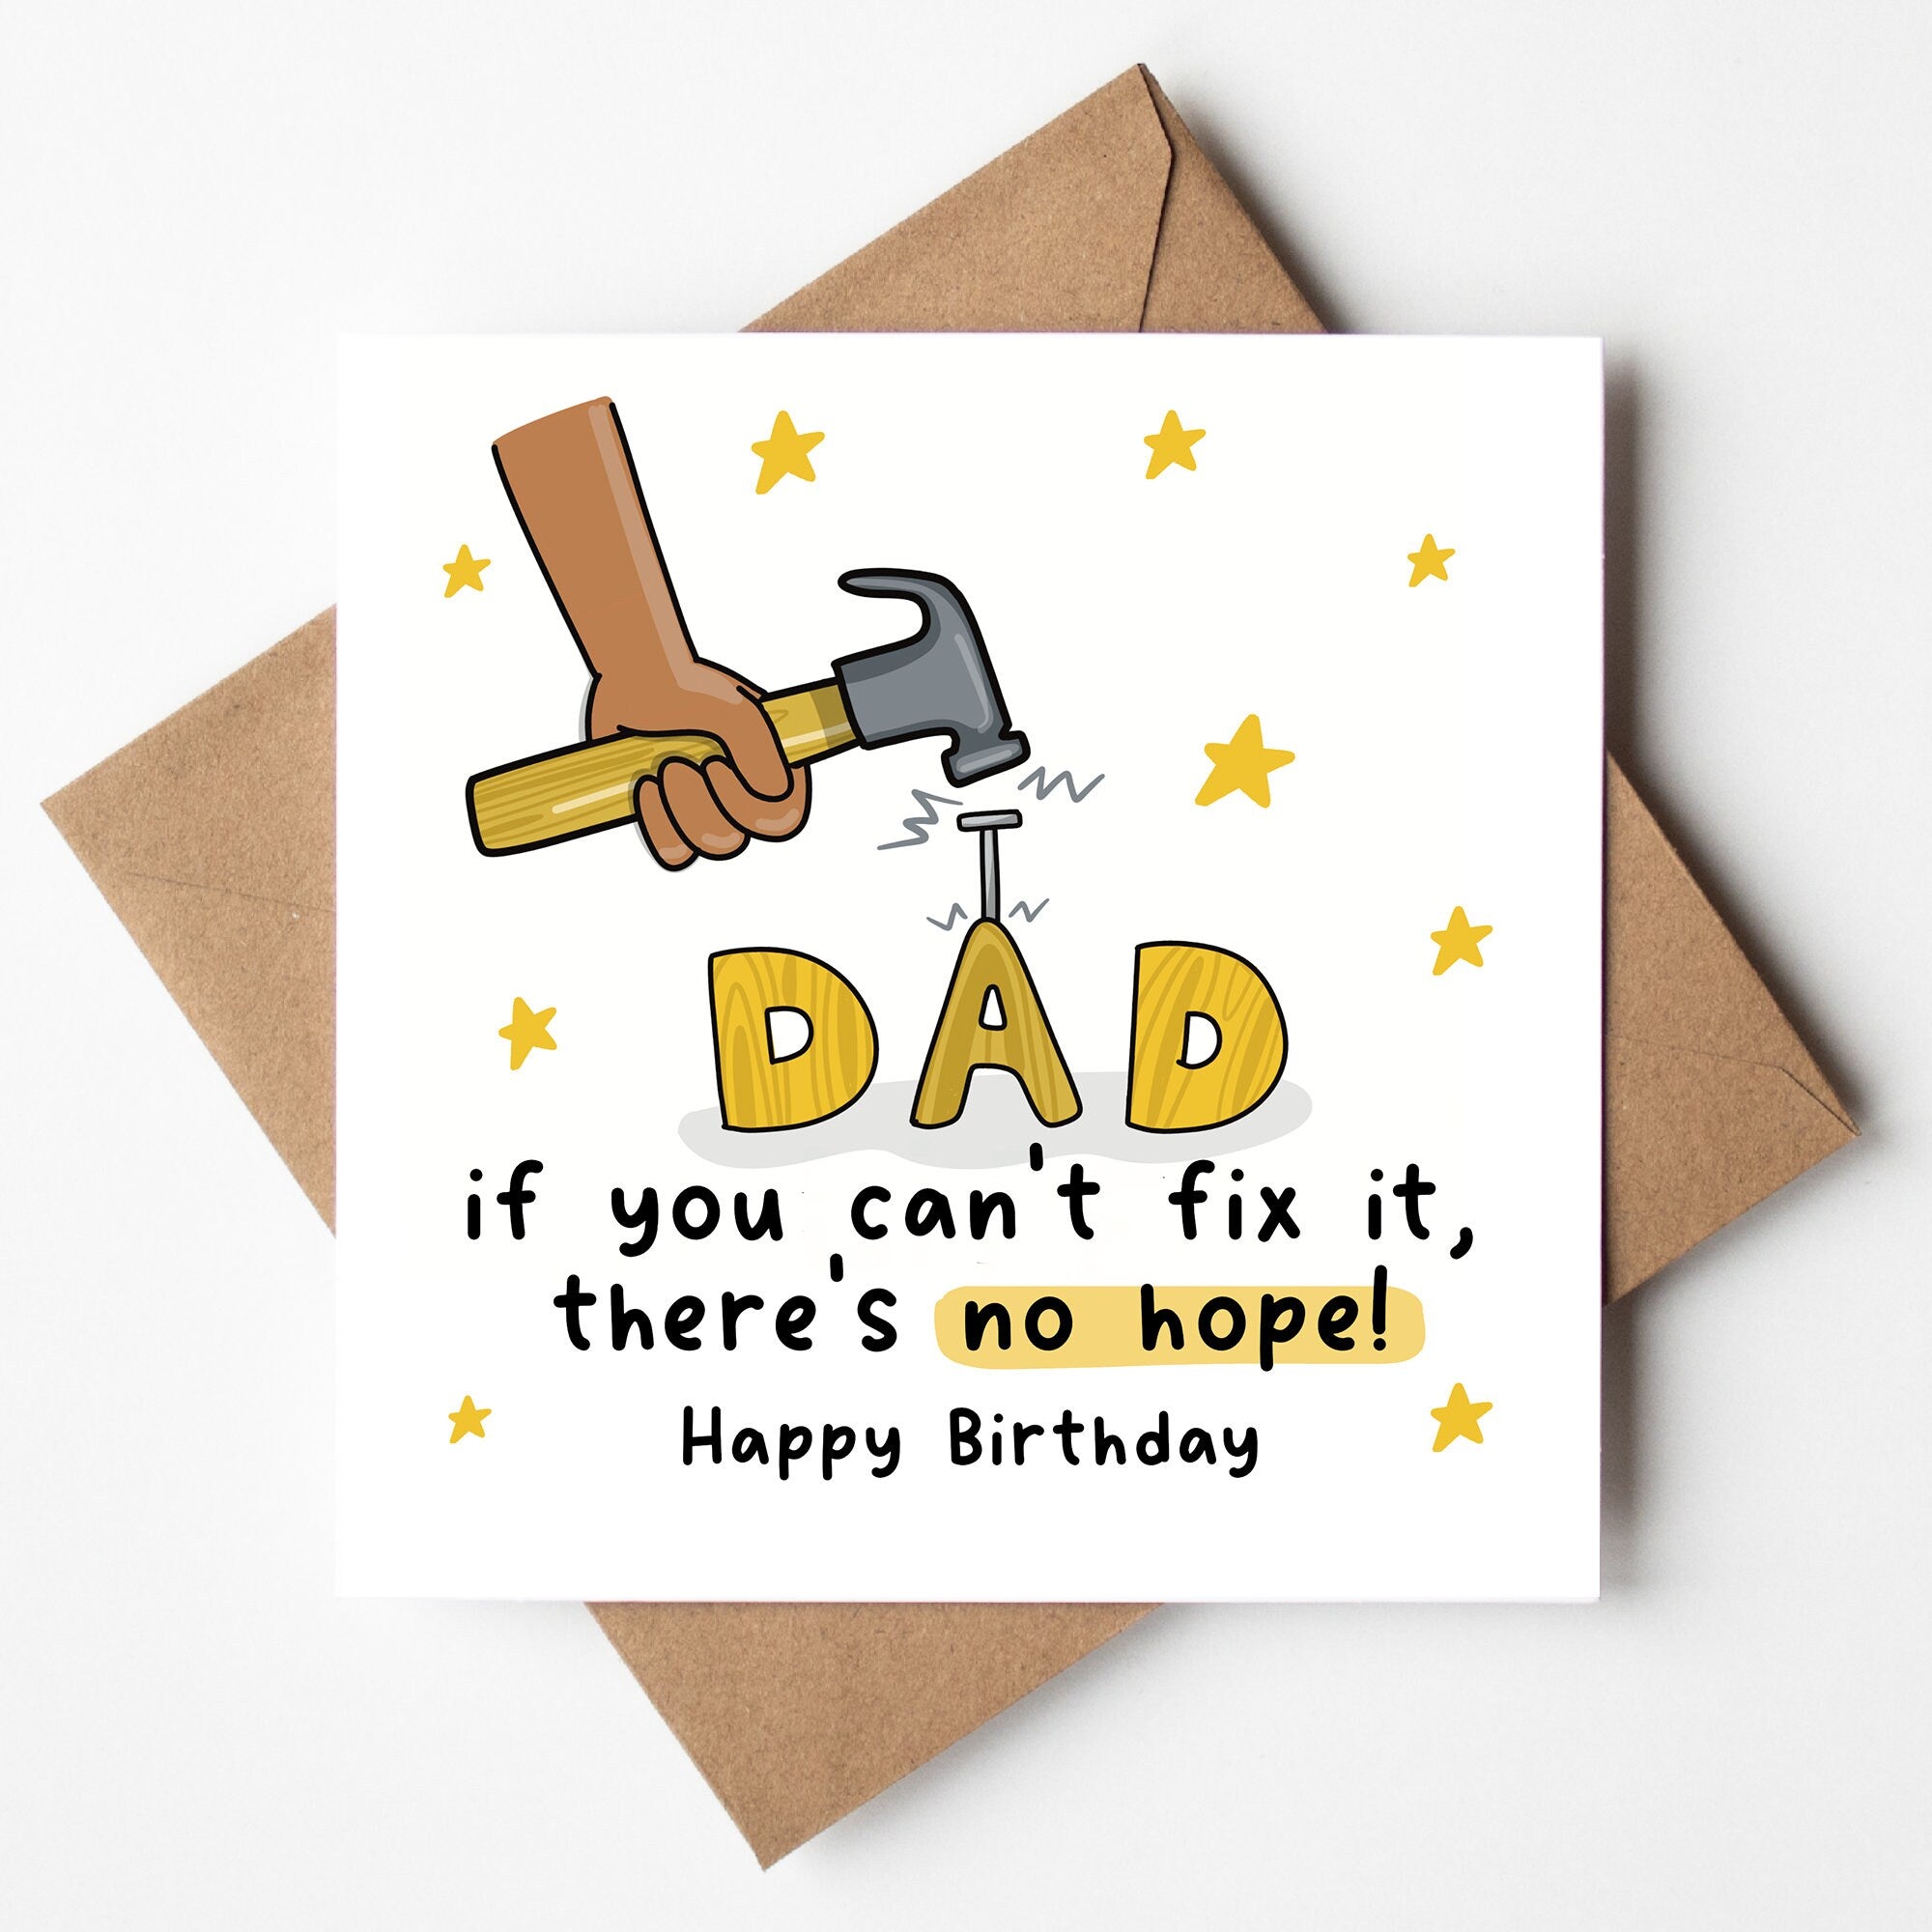 If Dad Can't Fix It, There's No Hope, Funny Dad Birthday Card, Birthday Card Daddy, Funny Dad Birthday Gift, Dad Card, Tools, DIY Dad Card